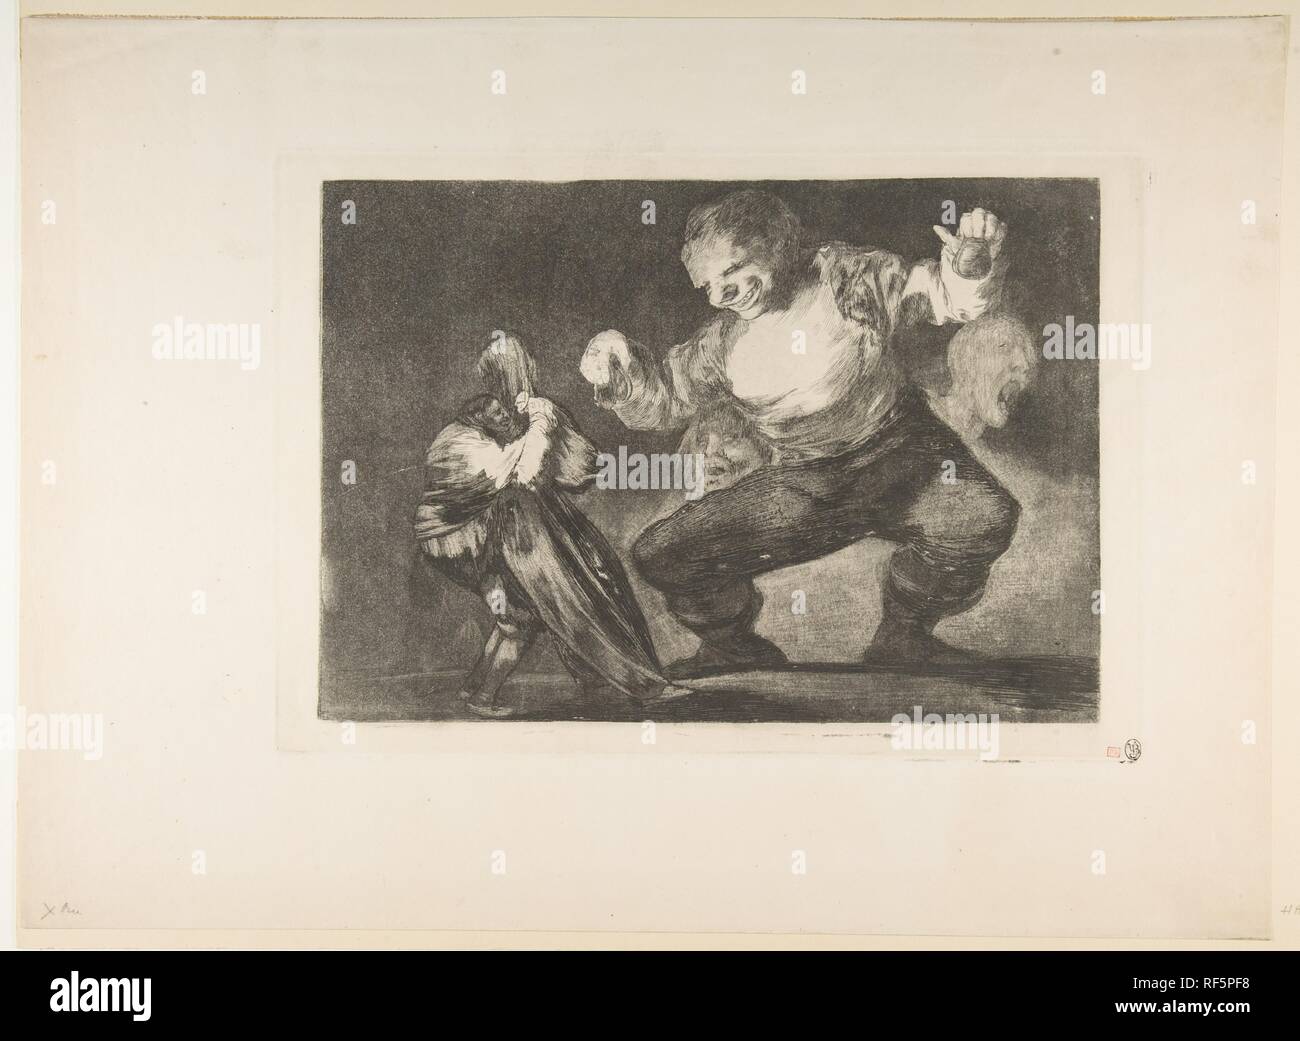 Plate 4 from the 'Disparates': Simpleton. Artist: Goya (Francisco de Goya y Lucientes) (Spanish, Fuendetodos 1746-1828 Bordeaux). Dimensions: Plate: 9 5/8 × 13 3/4 in. (24.5 × 35 cm)  Sheet: 14 5/8 × 19 15/16 in. (37.2 × 50.6 cm). Date: ca. 1816-23 (published between 1854-63).  Posthumous but prior to the first edition published by the Academia de San Fernando in Madrid in 1864 under the title 'Los Proverbios'. Museum: Metropolitan Museum of Art, New York, USA. Stock Photo